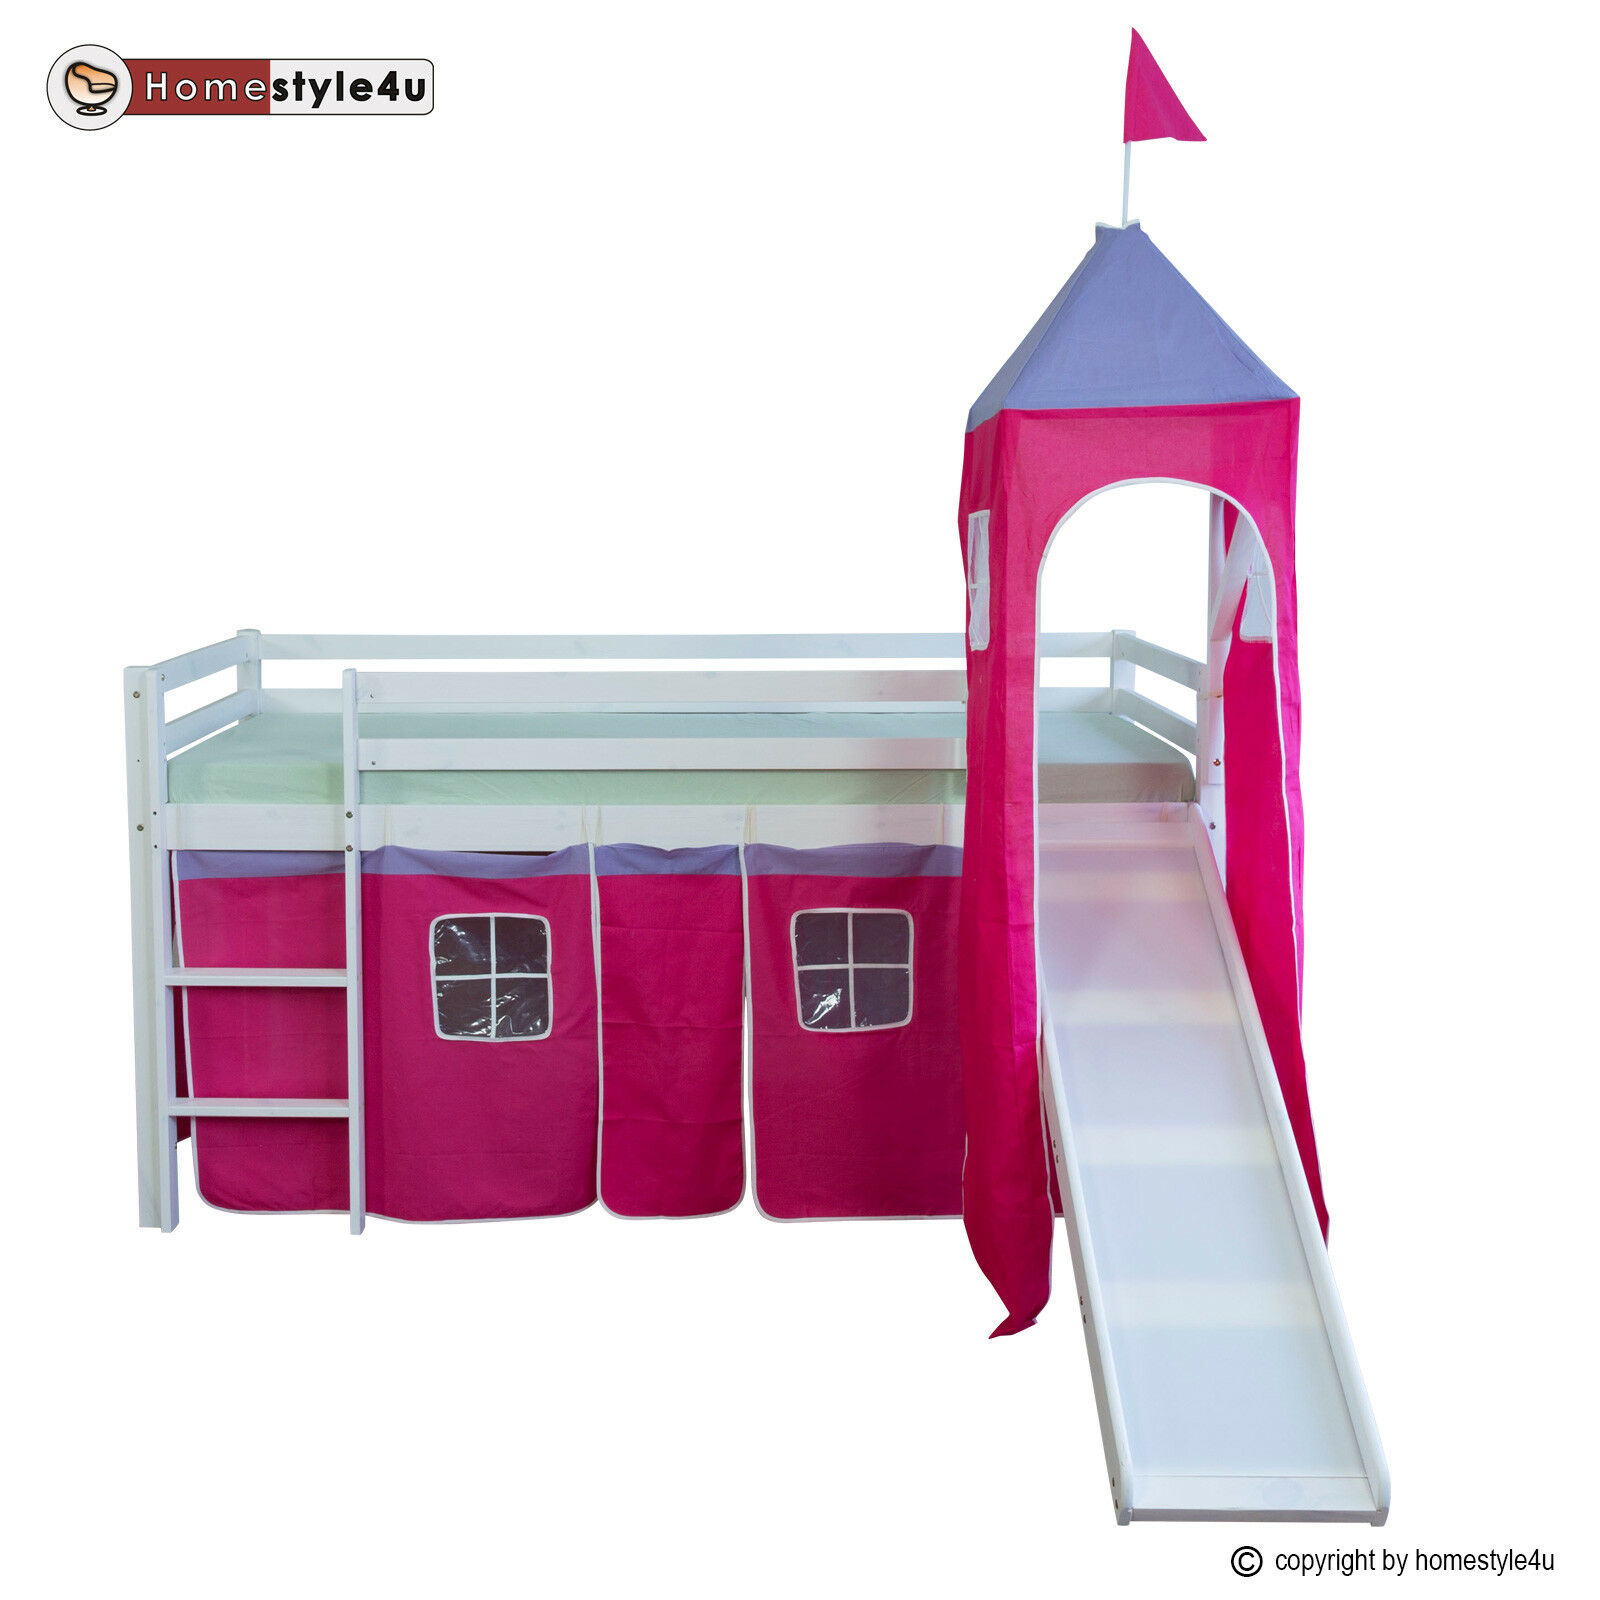 Loftbed Childrenbed Slide Tower Solid Pine Curtain Red 90x200